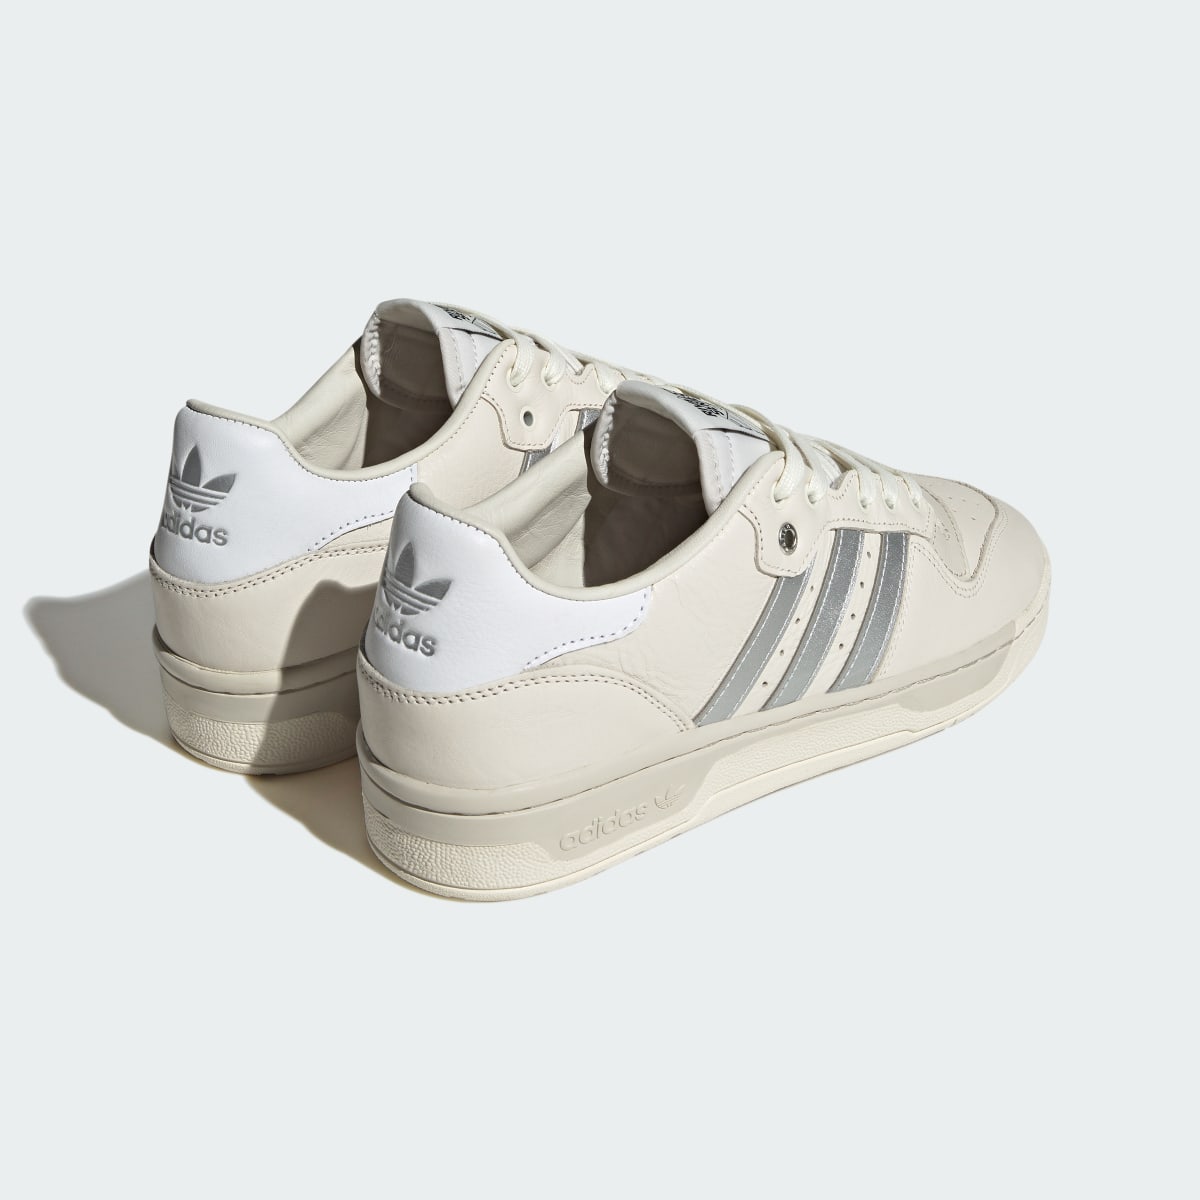 Adidas Chaussure Rivalry Low Consortium. 7